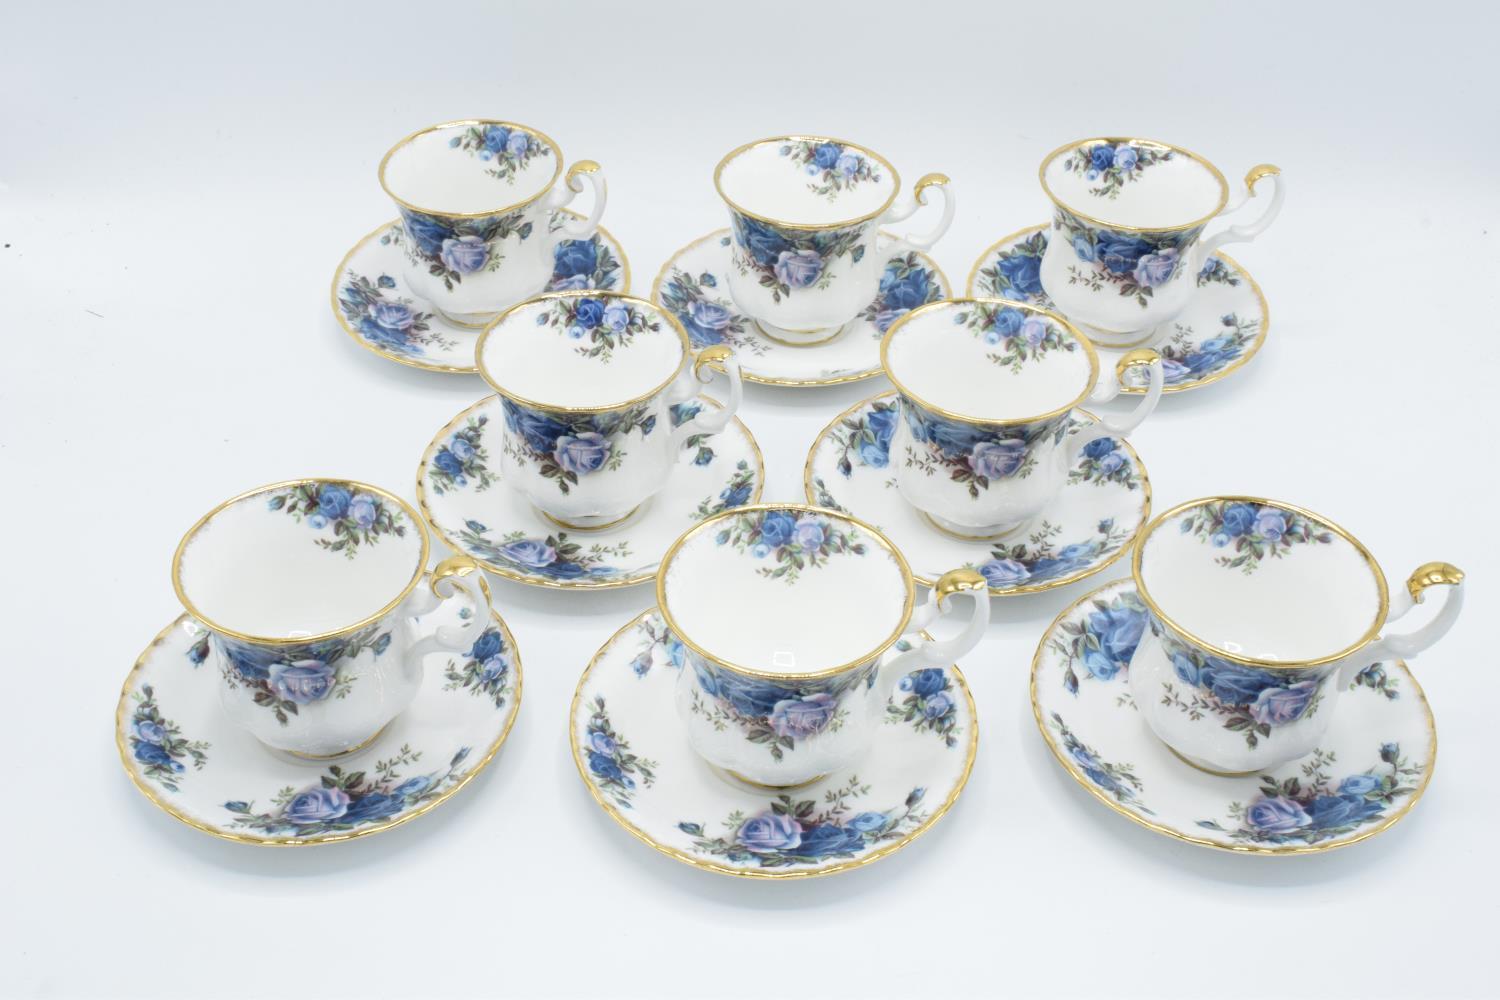 Royal Albert 8 coffee cups and saucers in the Moonlight Rose design (16) In good condition with no